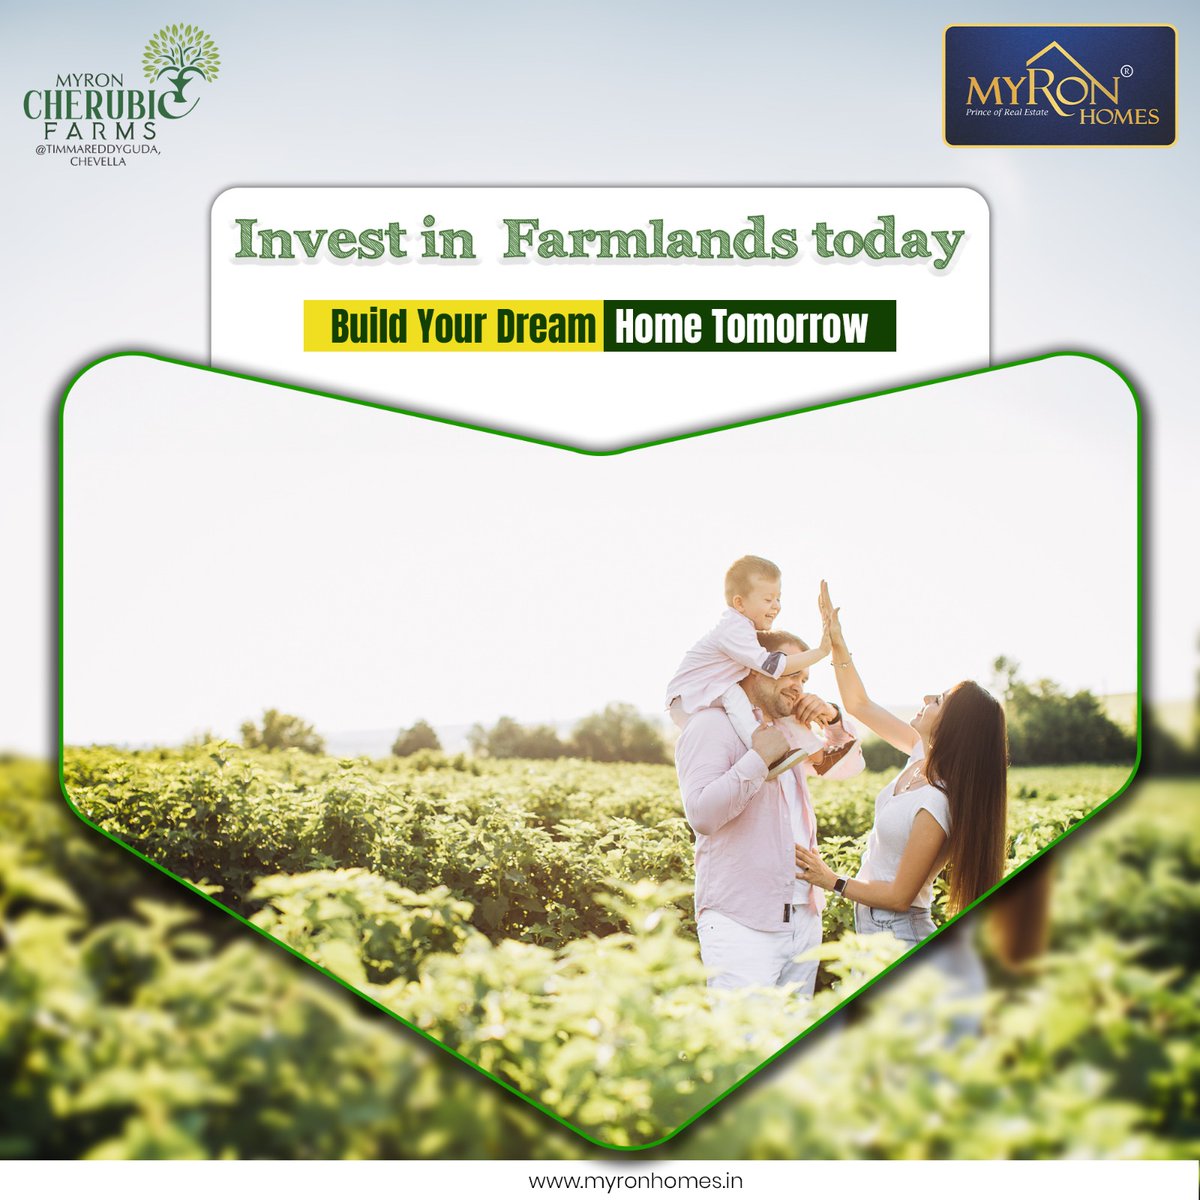 Growth without boundaries: Exploring the endless opportunities of farmland investments.

#Myronhomes #farmlandforsale #cherubicfarmland #farmland #BestInvestment #realestate #reality #Agricultural